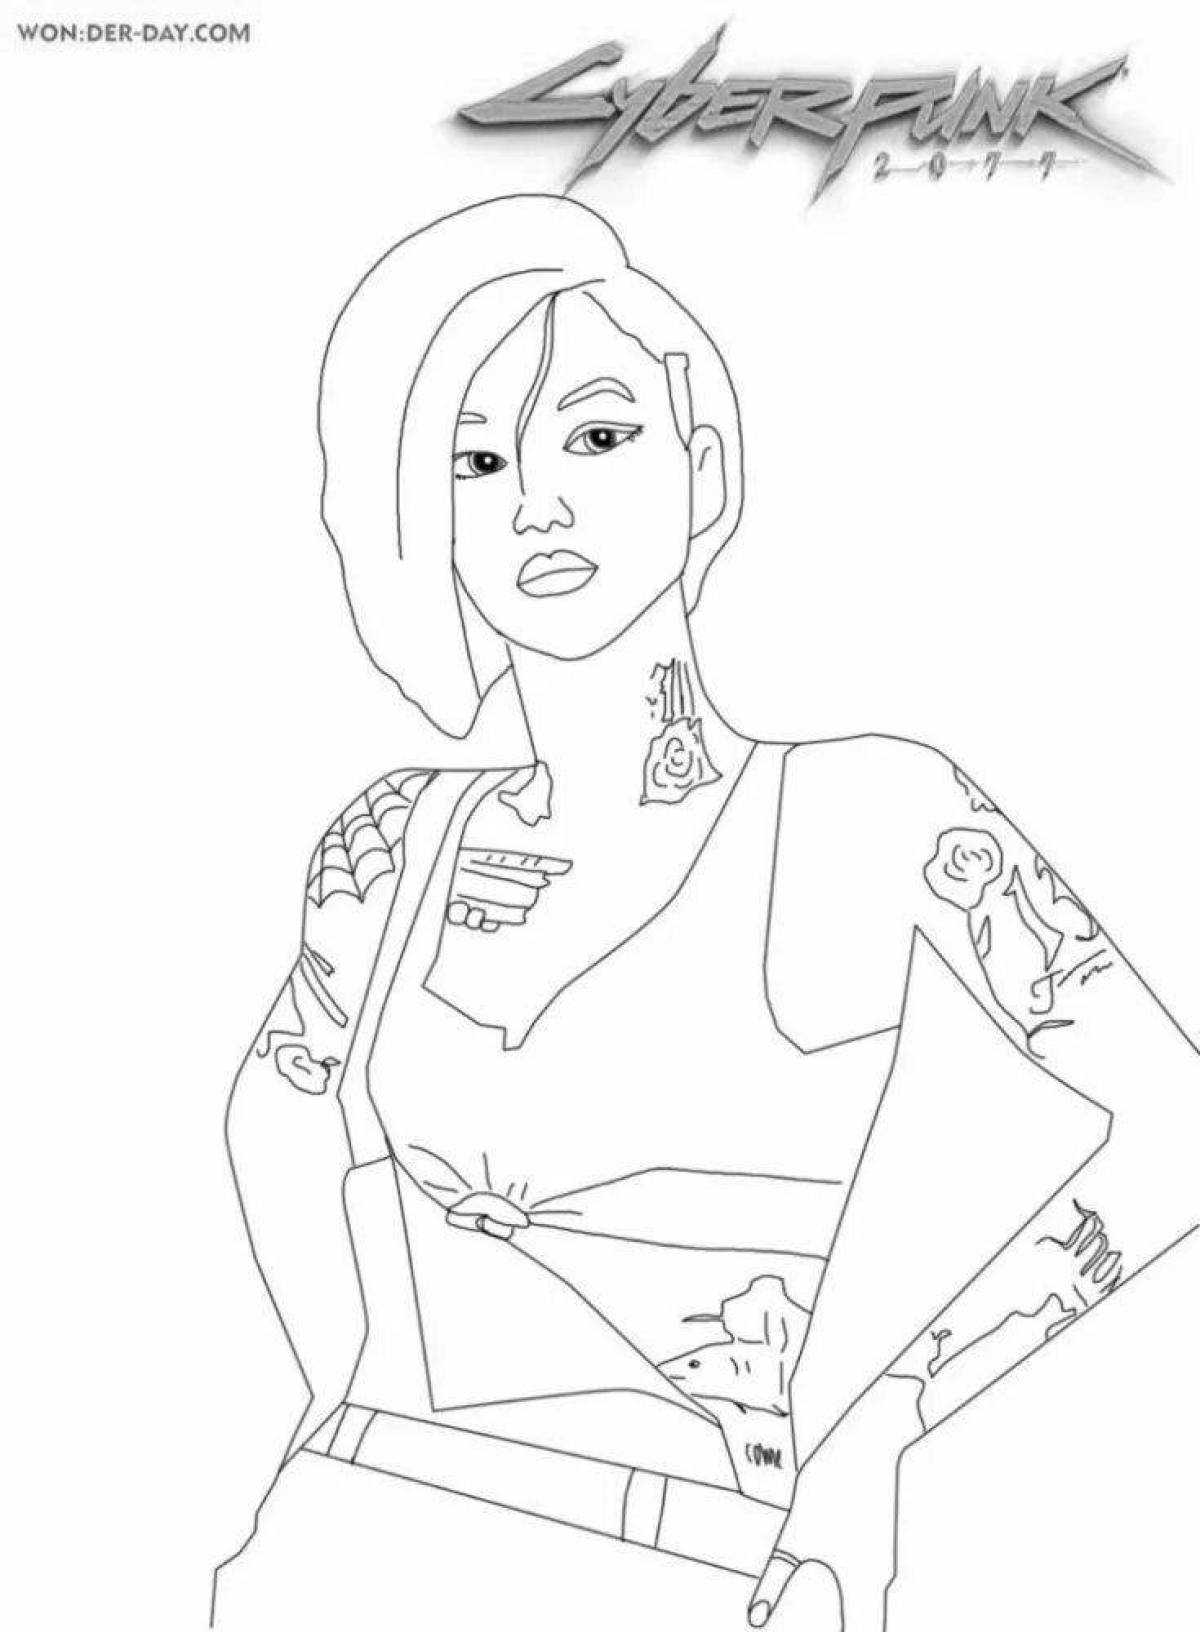 Detailed cyberpunk coloring book